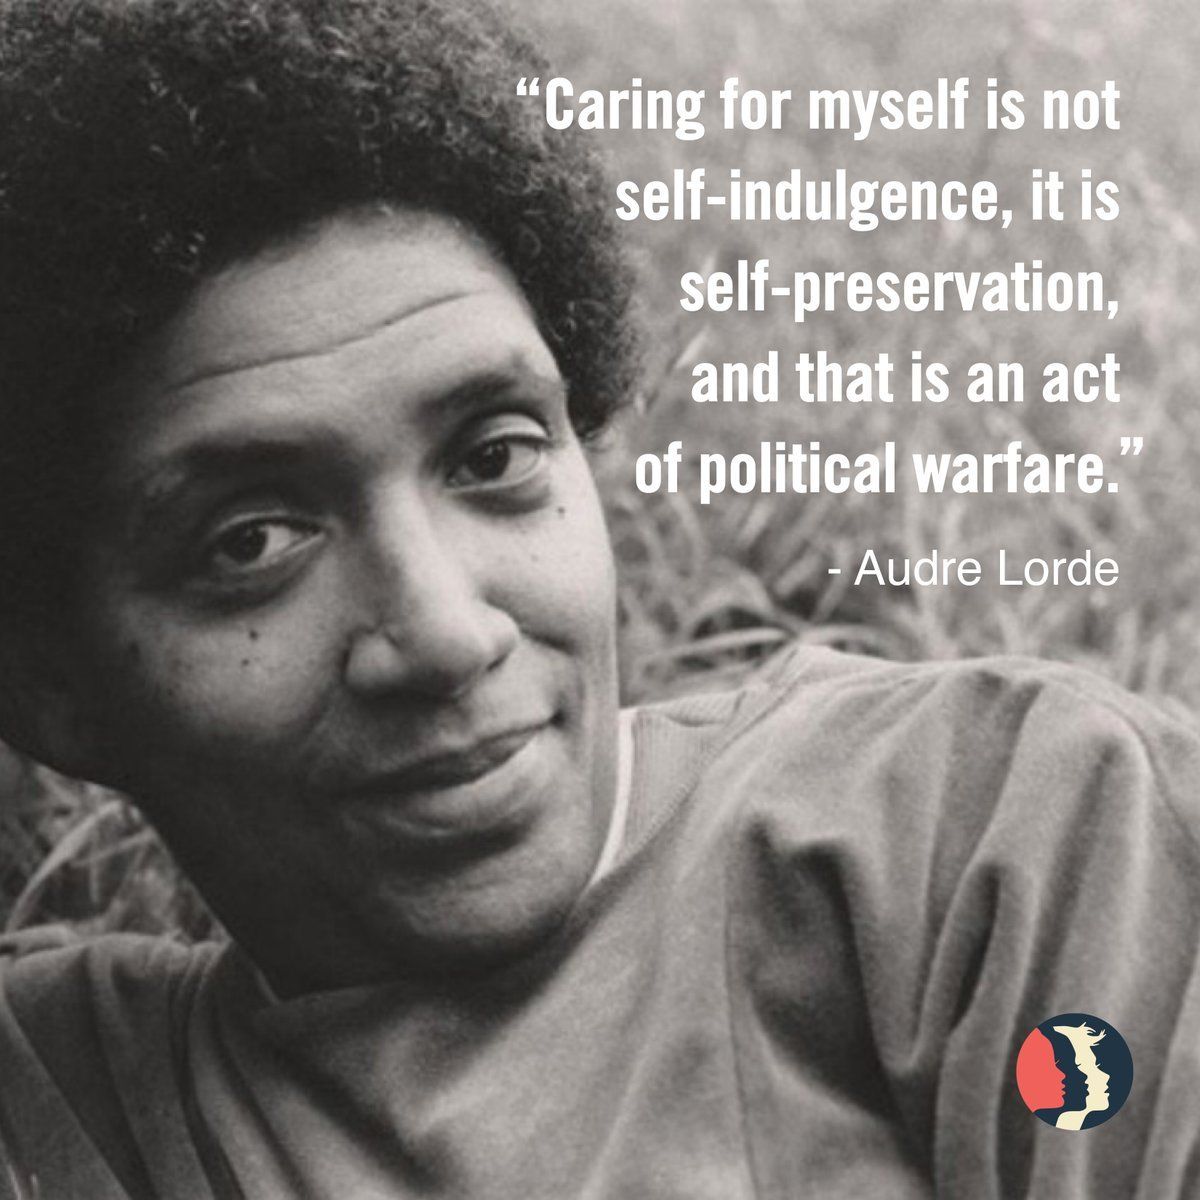  Happy Birthday to Audre Lorde born on February 18, 1934 in Harlem. 